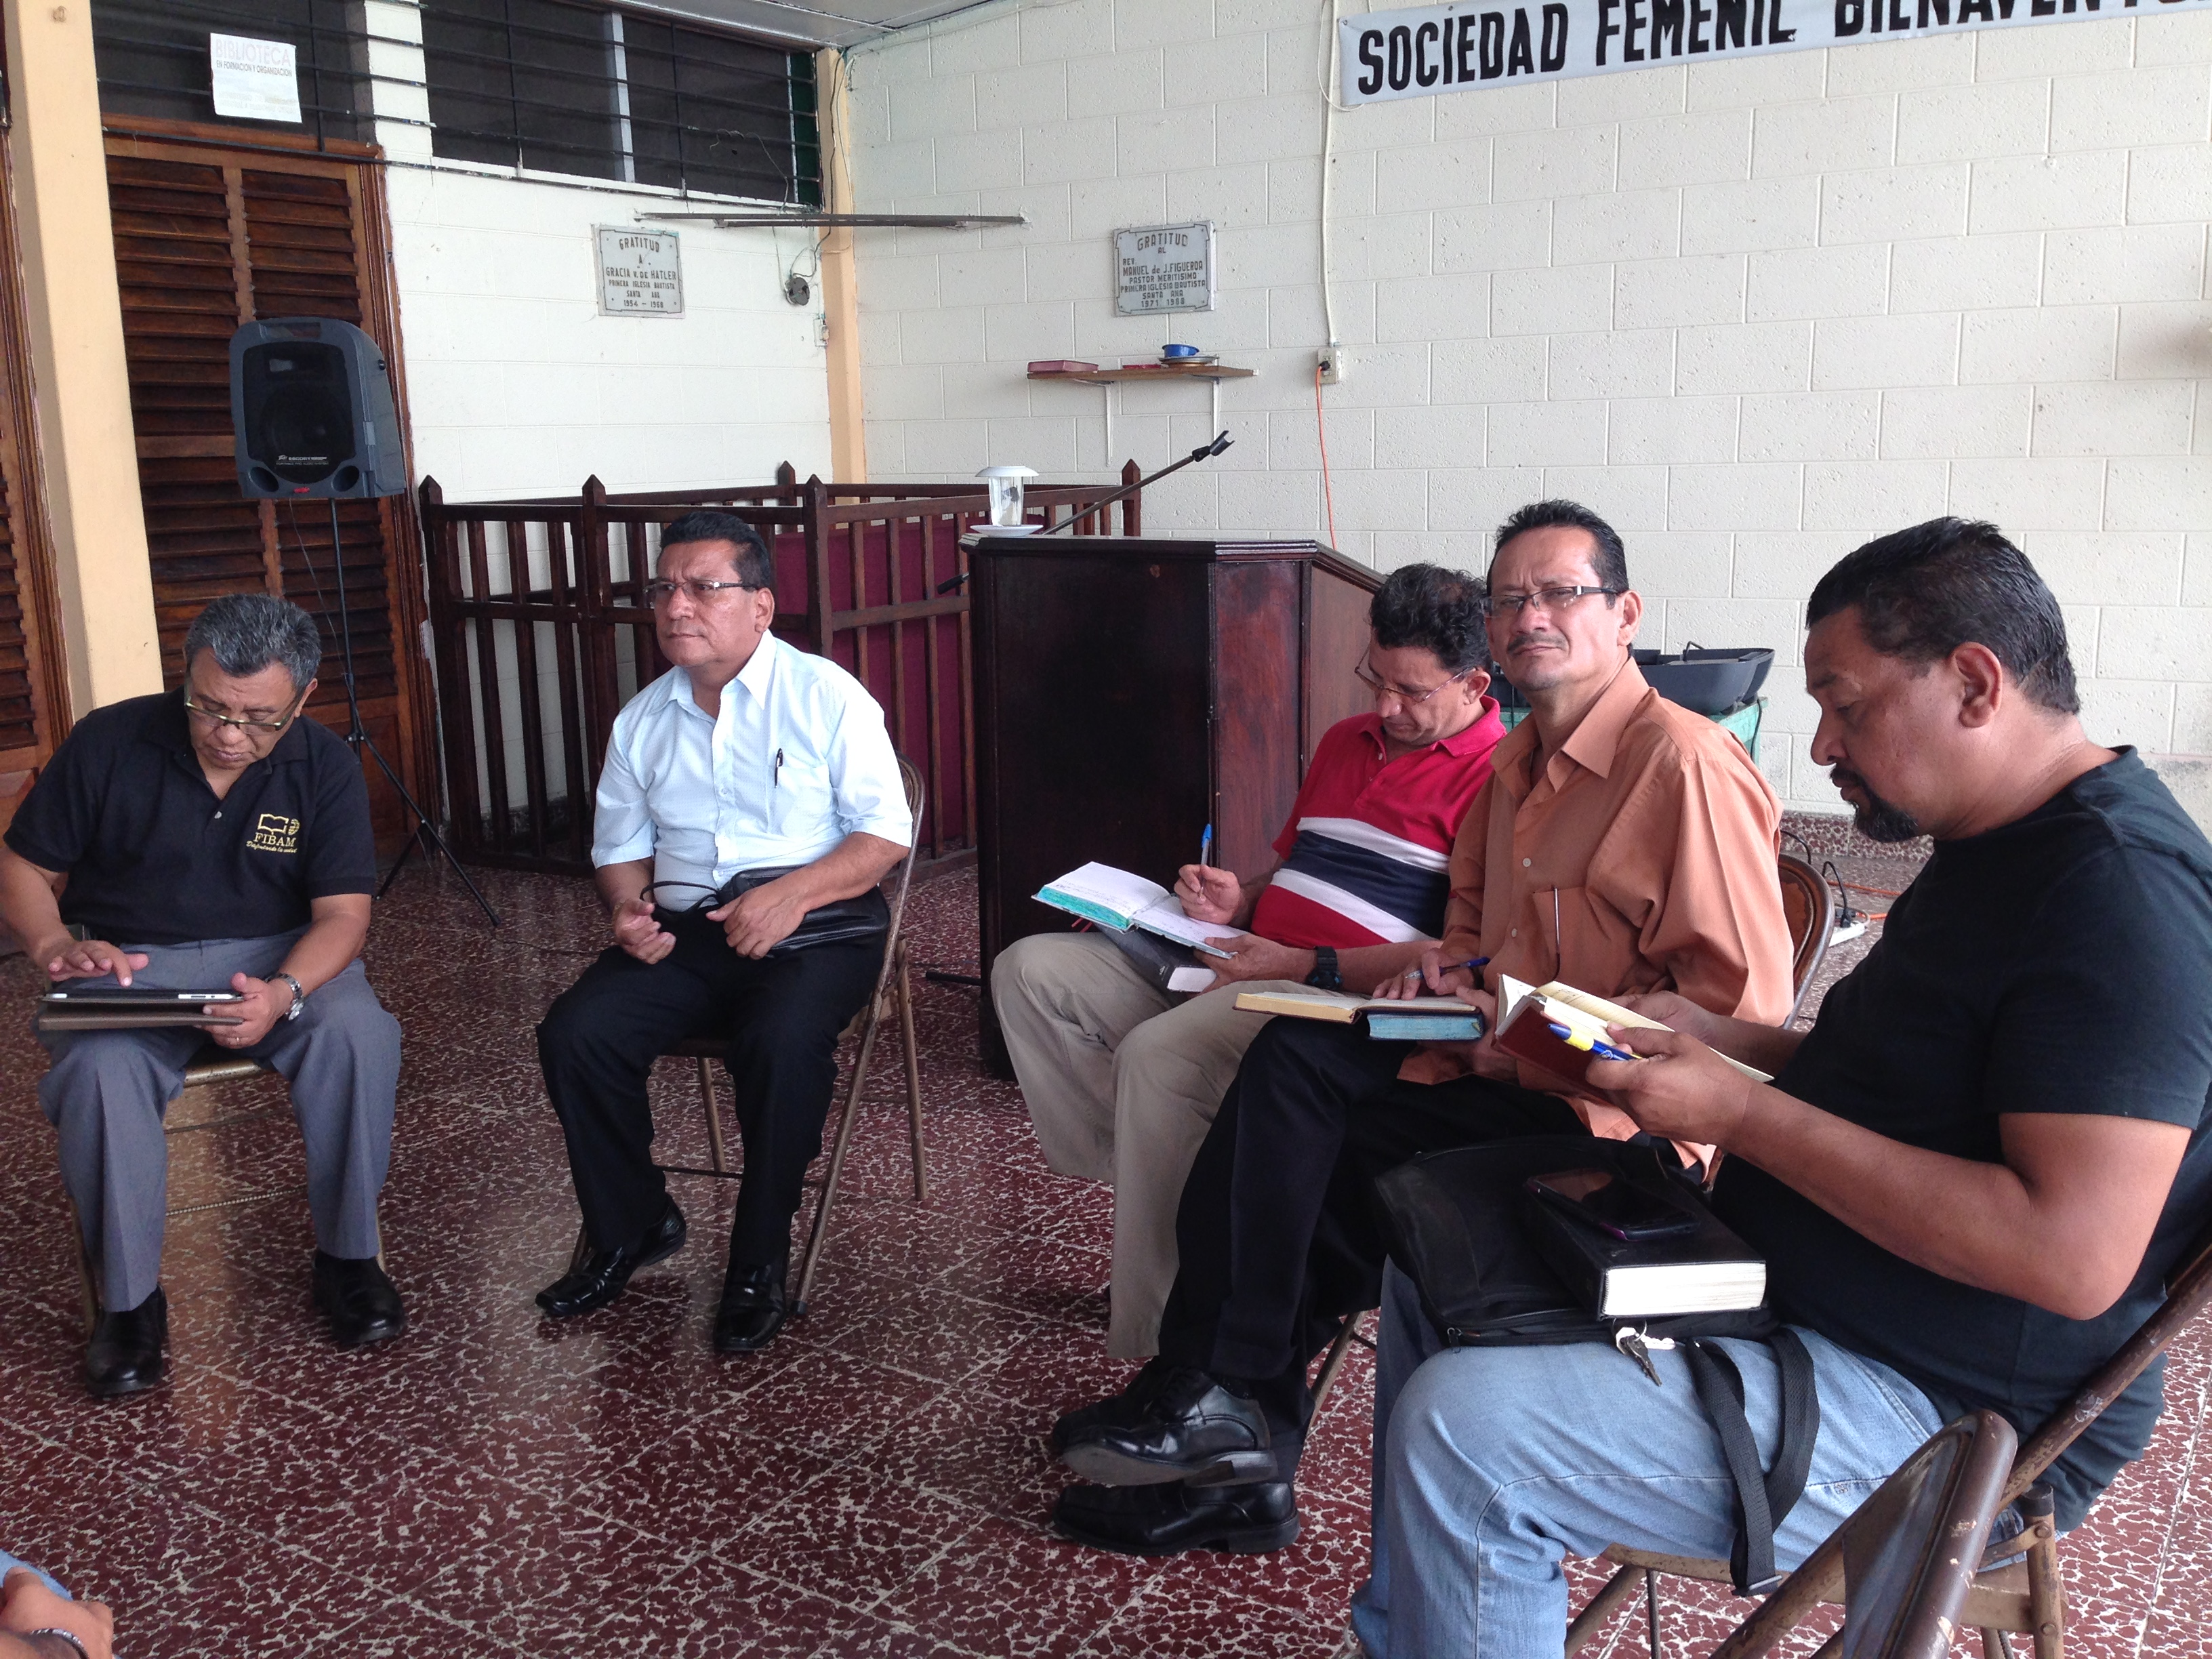 Meeting with Pastor Group in Santa Ana